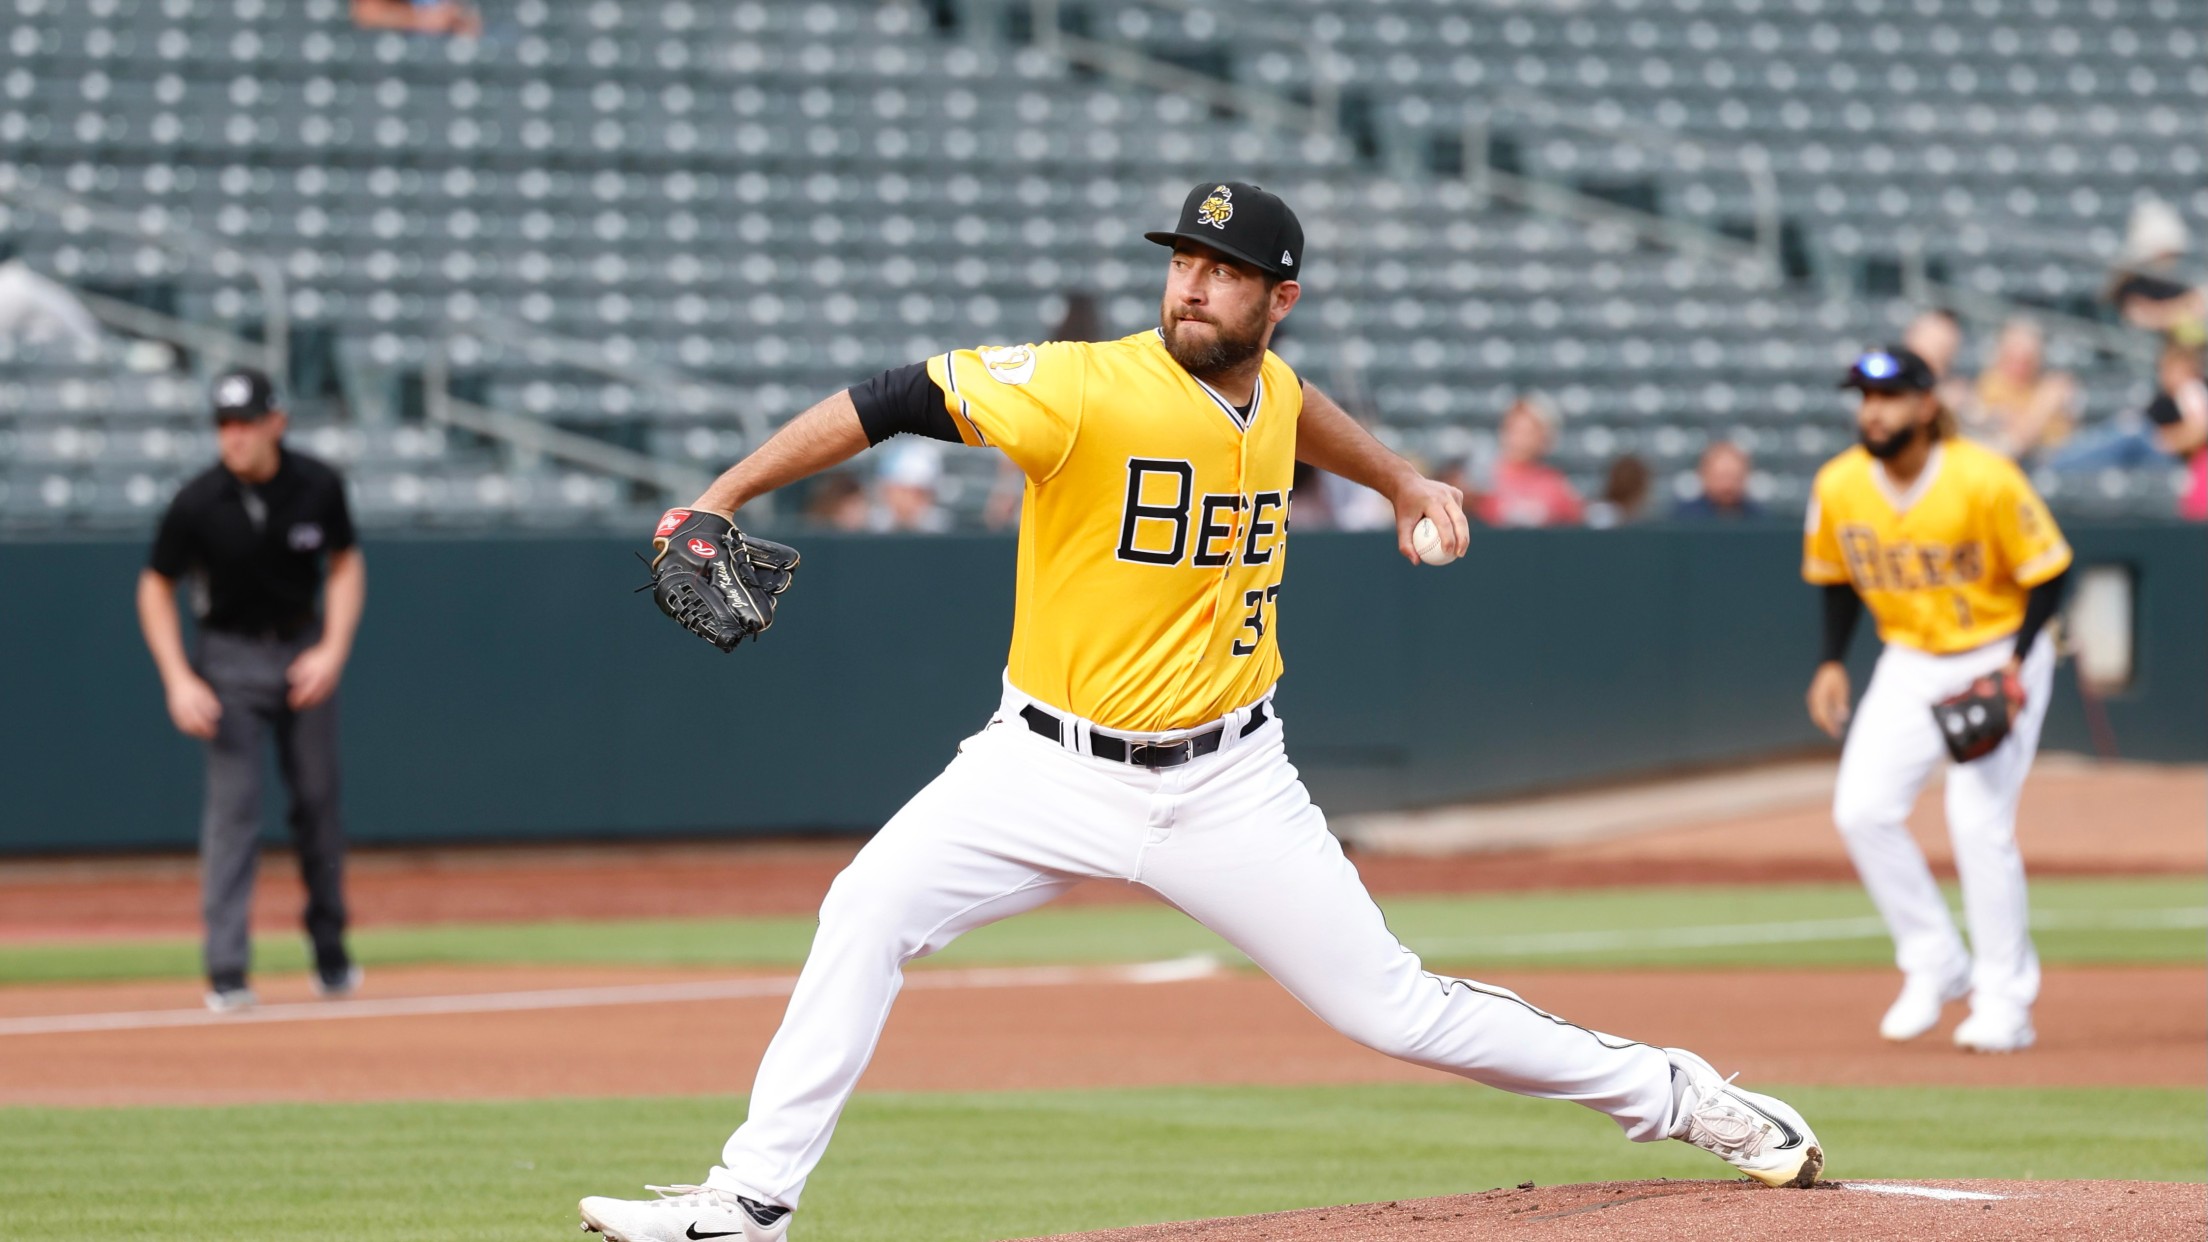 Jake Kalish Stats, Age, Position, Height, Weight, Fantasy & News | MiLB.com